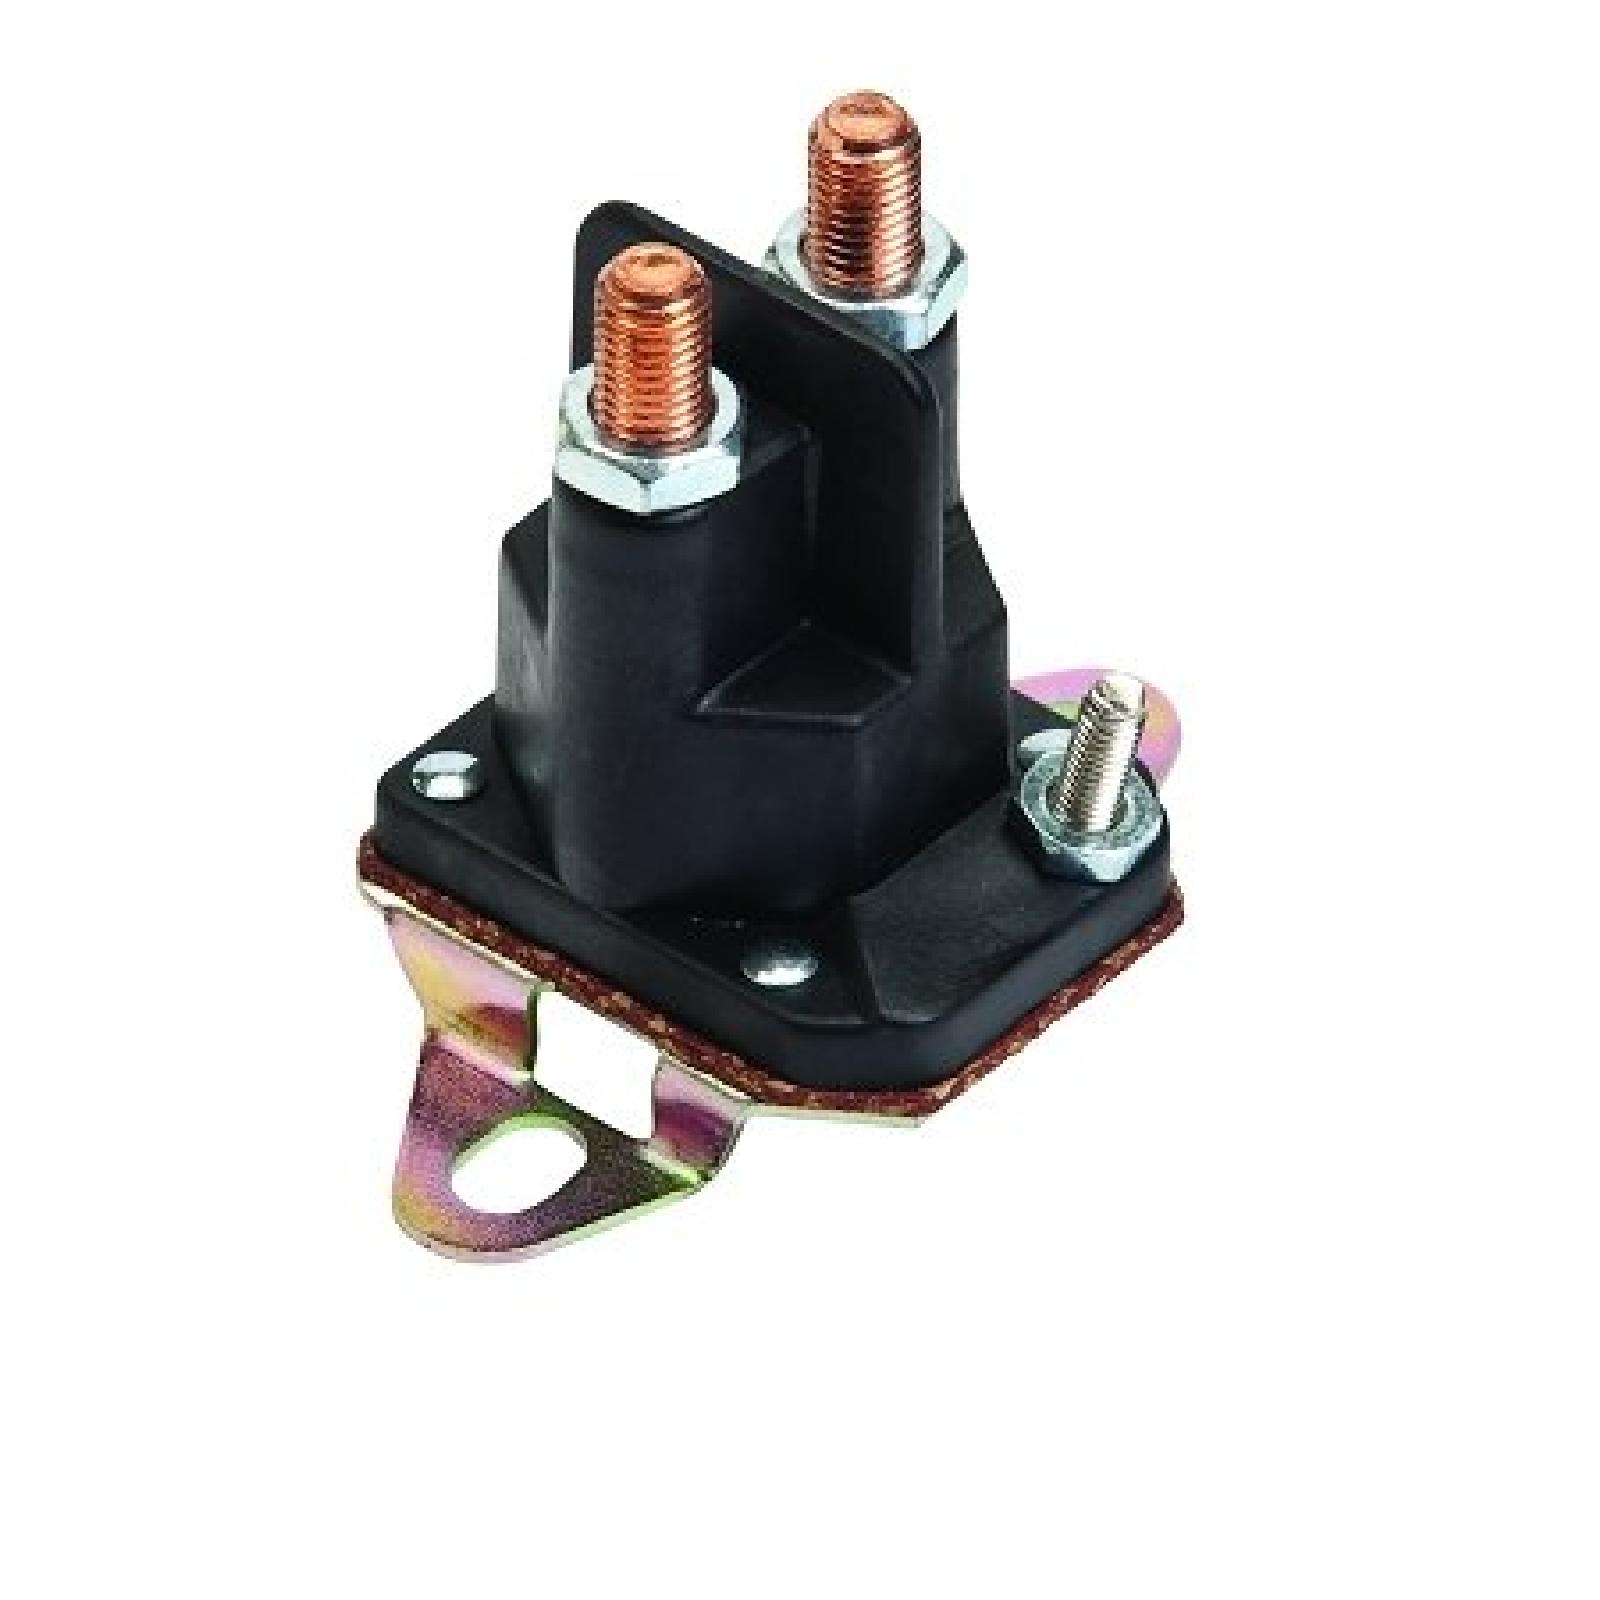 SOLENOID, SNAPPER 3 POST part# 33-330 by Oregon